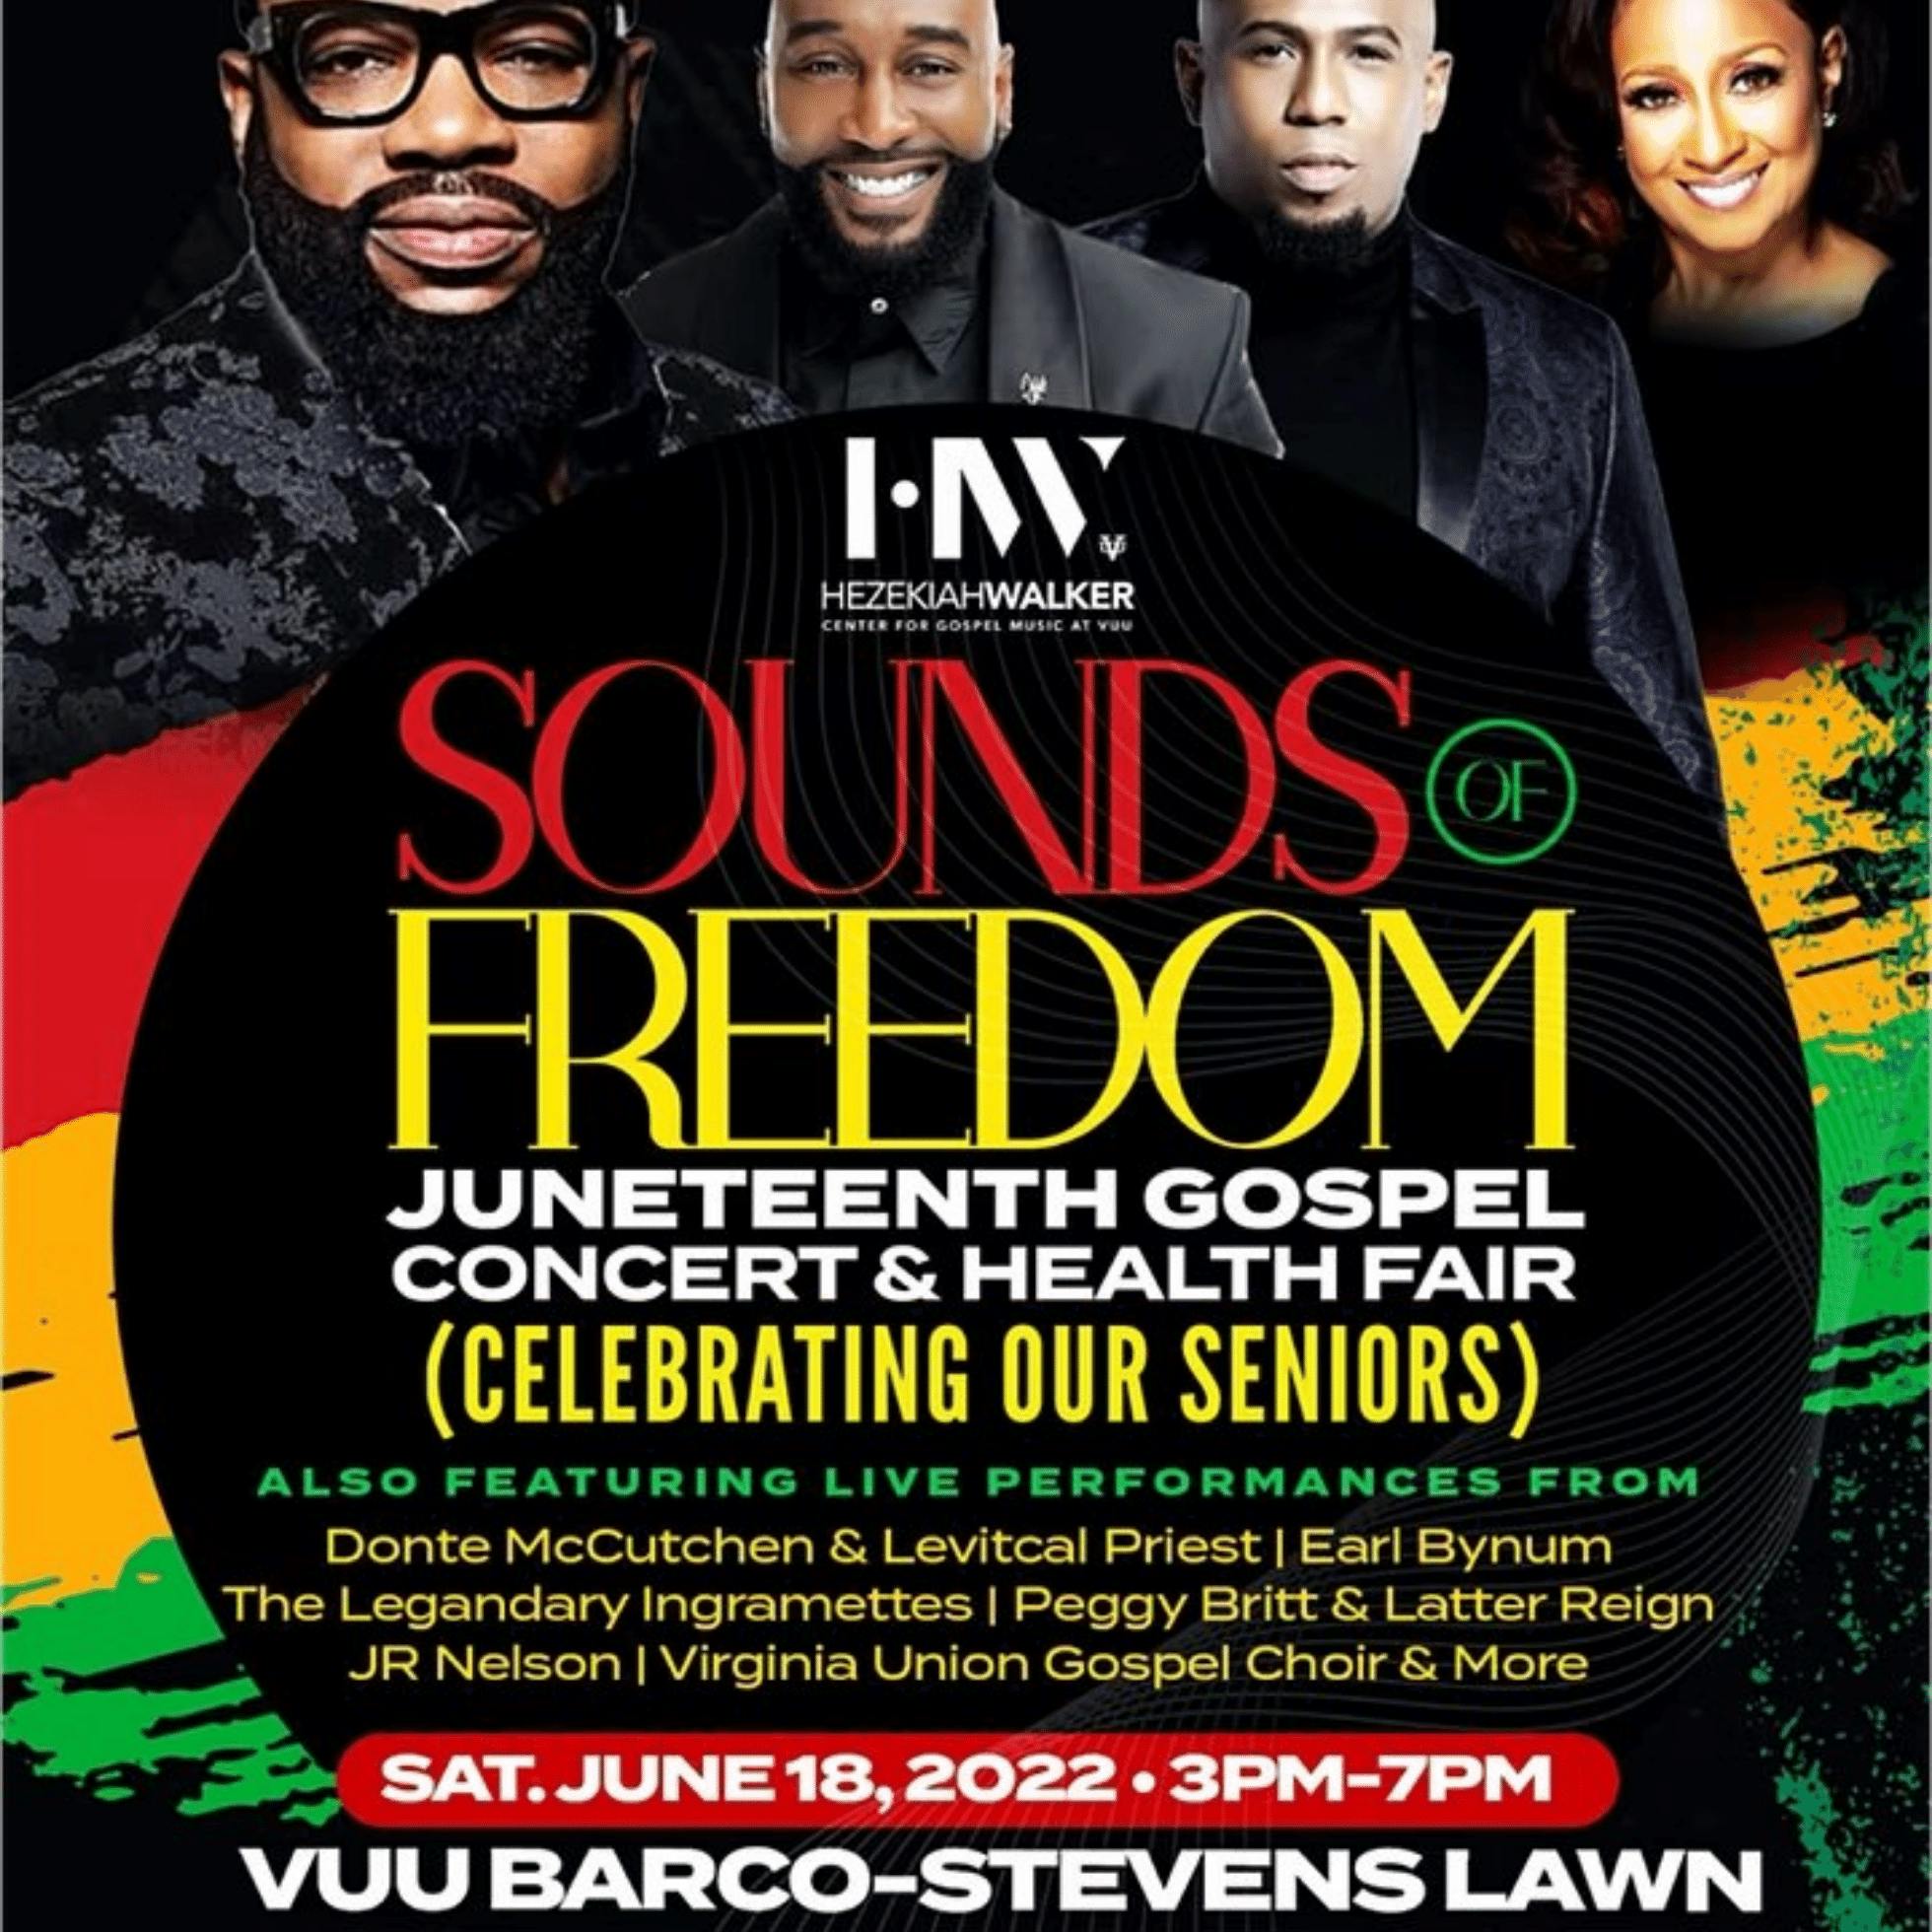 Juneteenth Sounds of Freedom